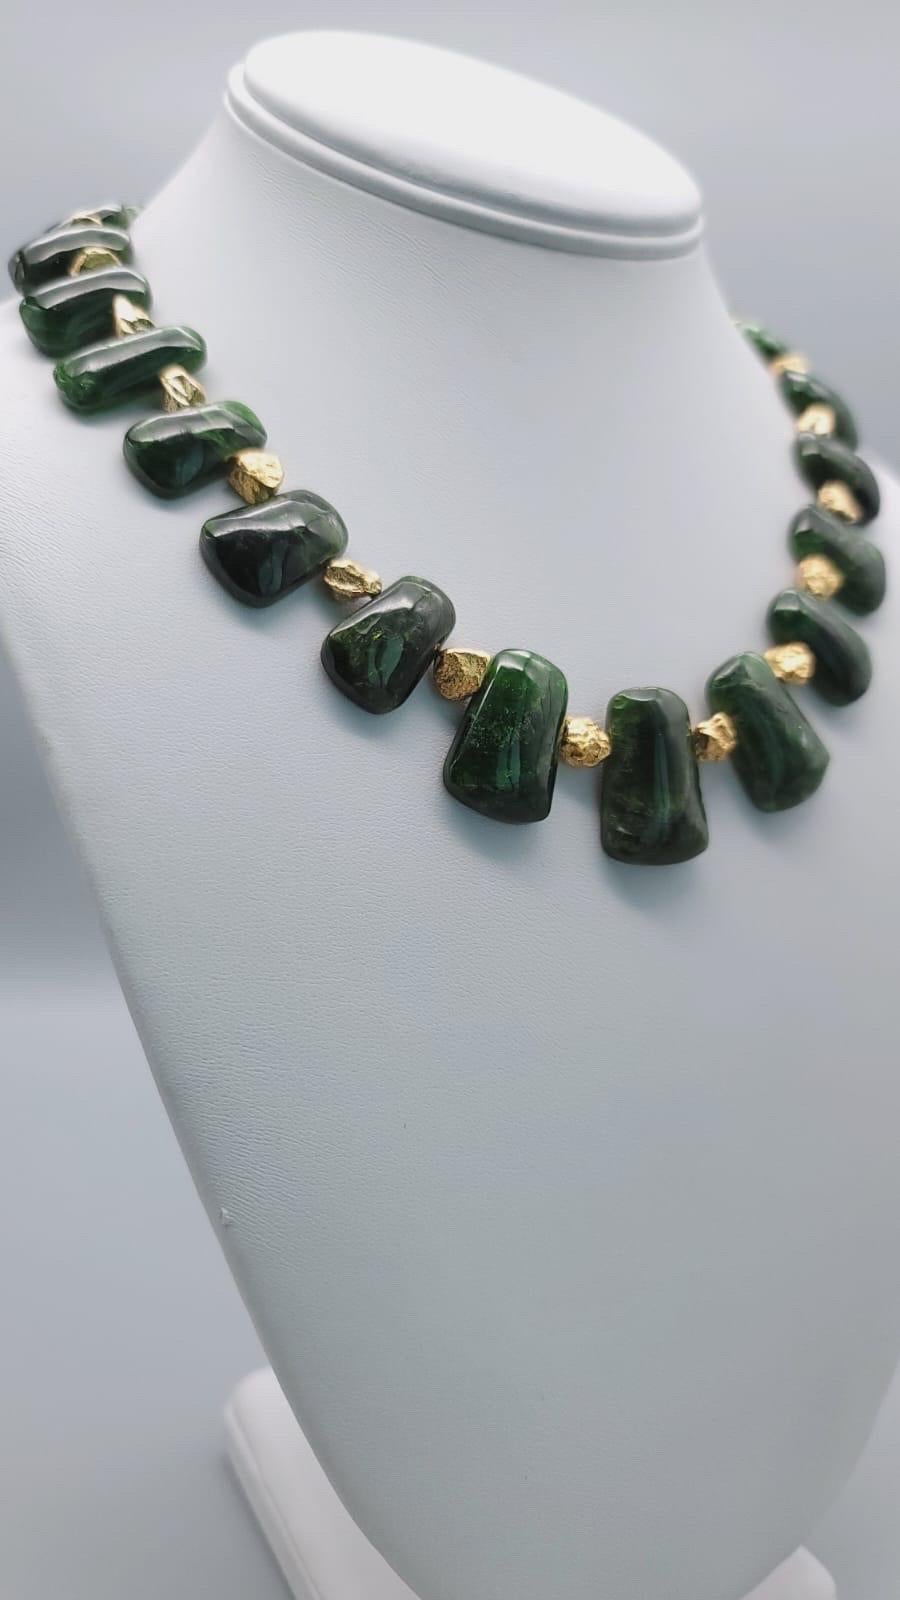 A.Jeschel Richly colored Chrome Diopside necklace 15